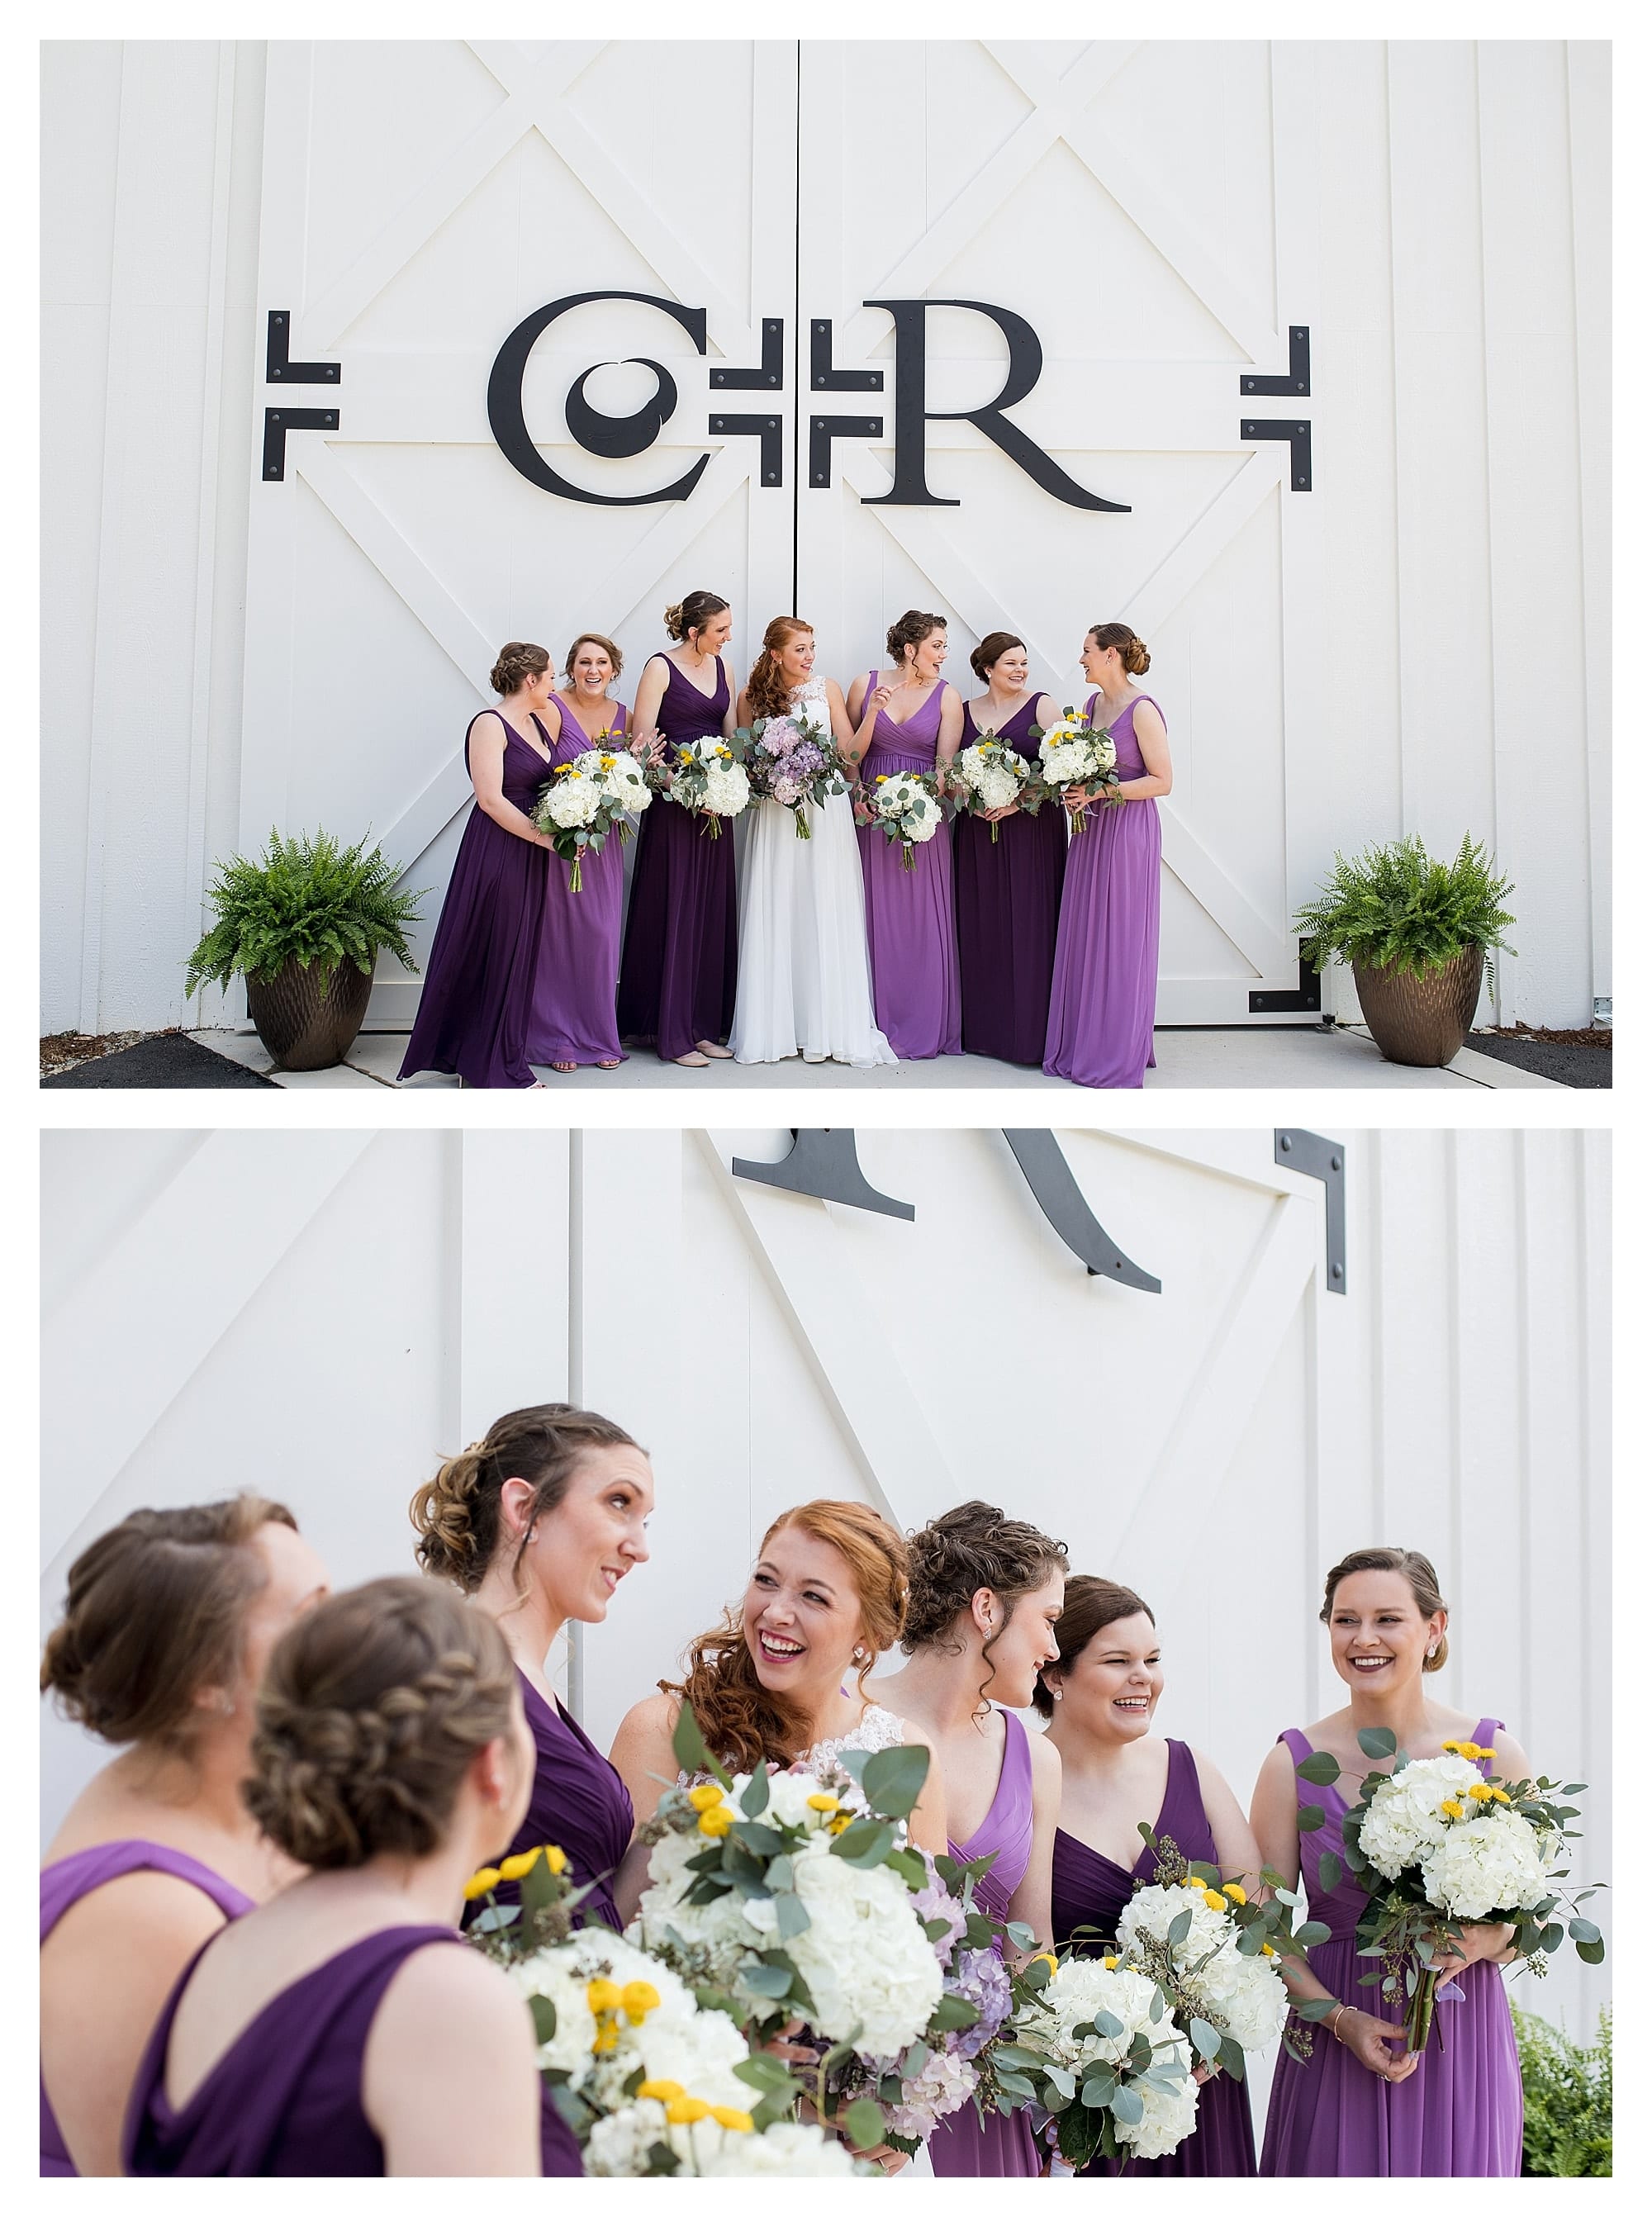 Spring wedding with bridesmaids in shades of purple